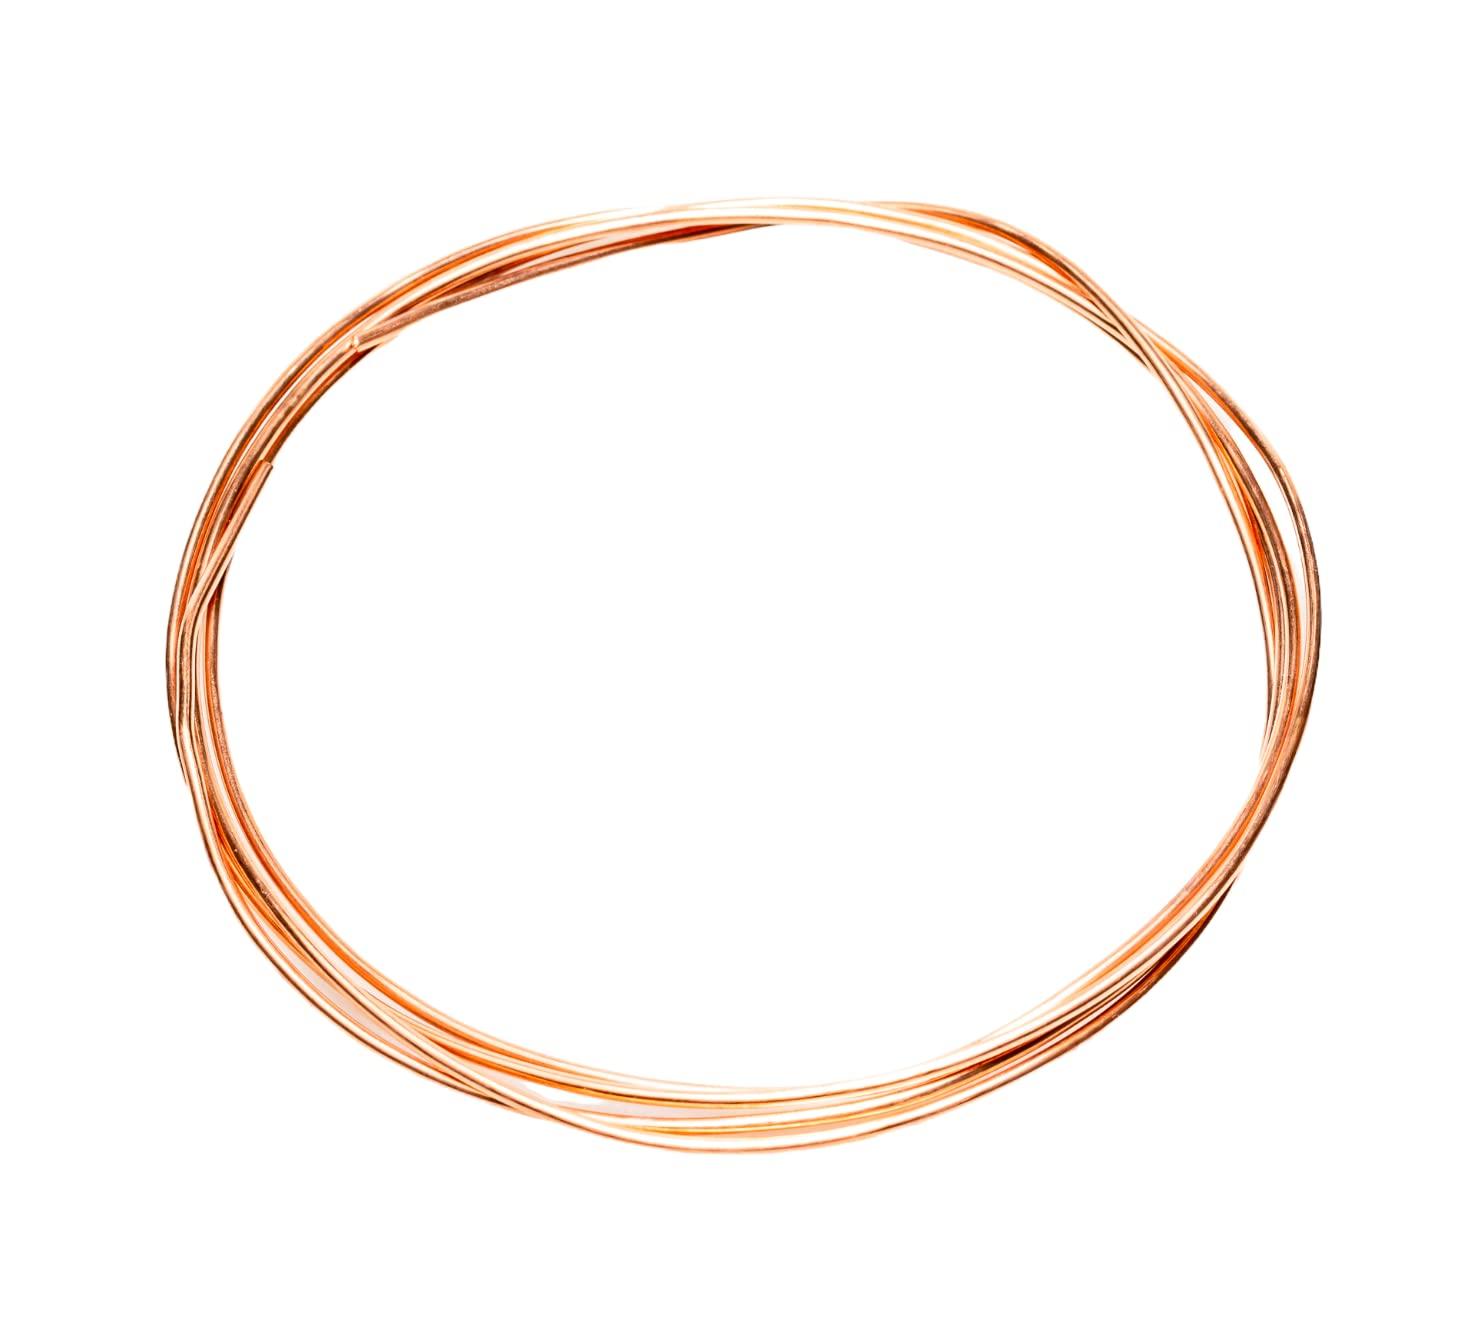 14 Gauge, 99.9% Pure Copper Wire (Round) Dead Soft CDA #110 Made in USA - 1  Ounce (5FT) by CRAFT WIRE